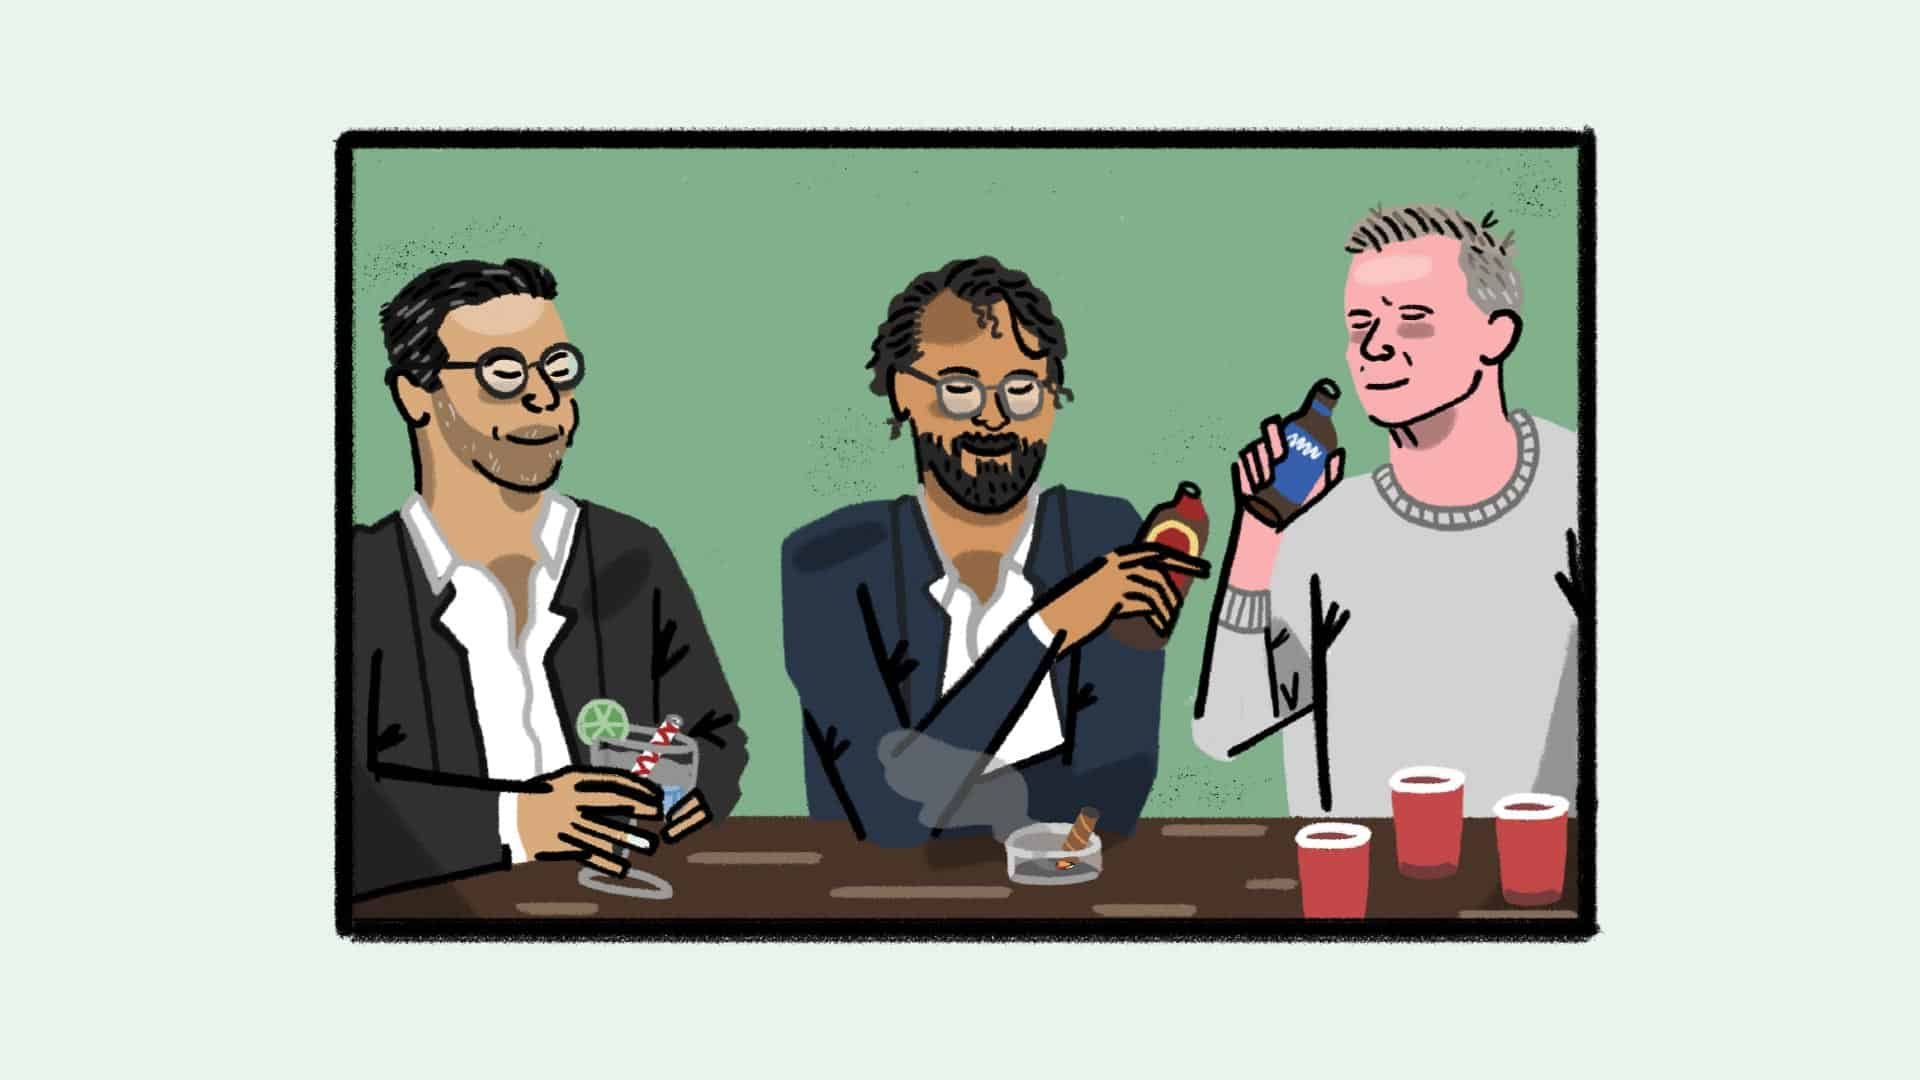 An illustration of Andrea Radrizzani drinking gin and slimline tonic, Victor Orta having a beer with an ashtray in front of him, and Jesse Marsch on a bottle of Bud Light with beer pong cups in front of him. Angus Kinnear has already gone home